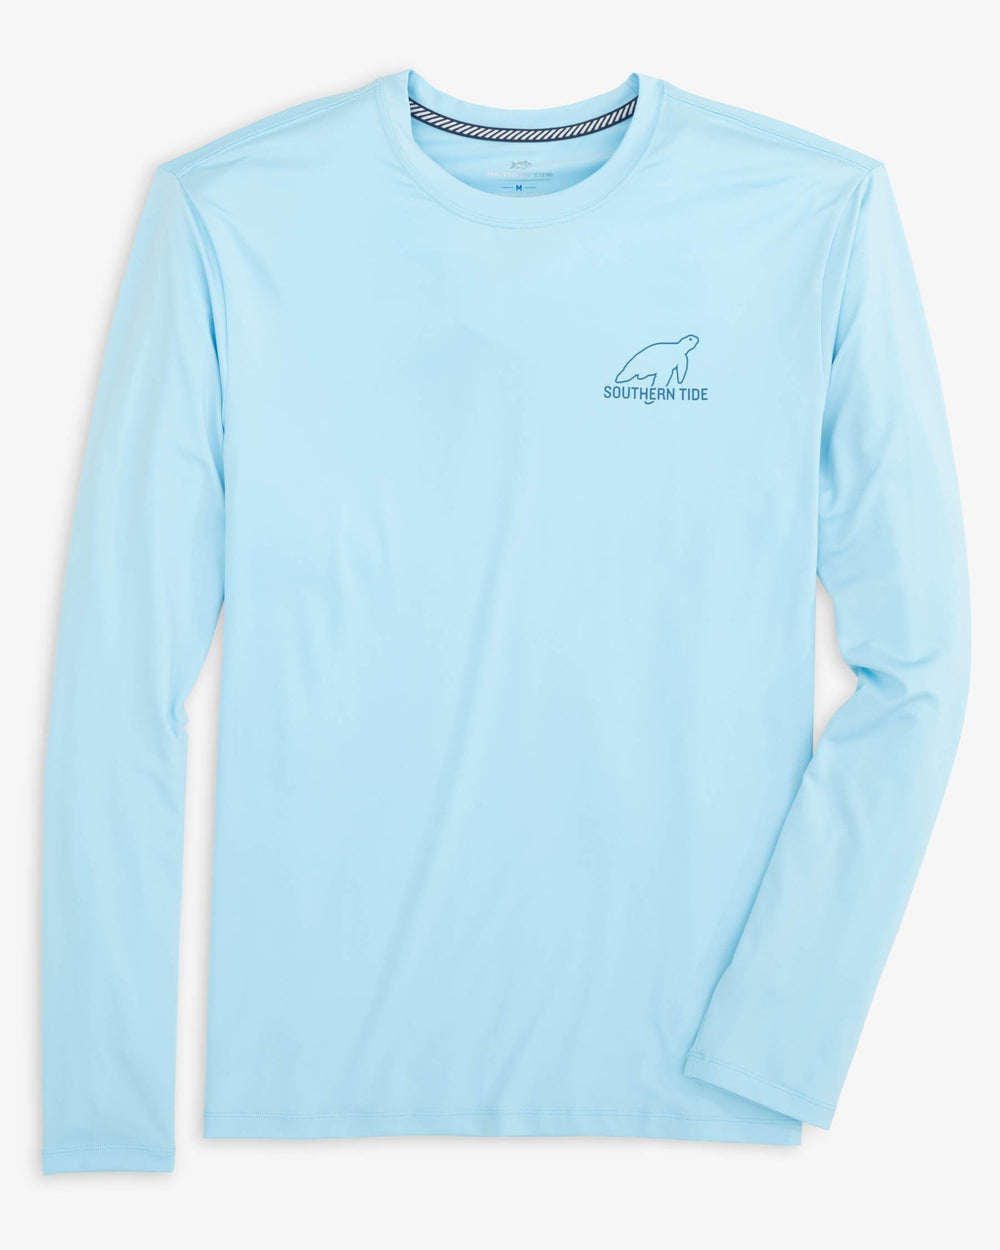 The front view of the Southern Tide Lined Turtle Long Sleeve Performance T-Shirt by Southern Tide - Rain Water